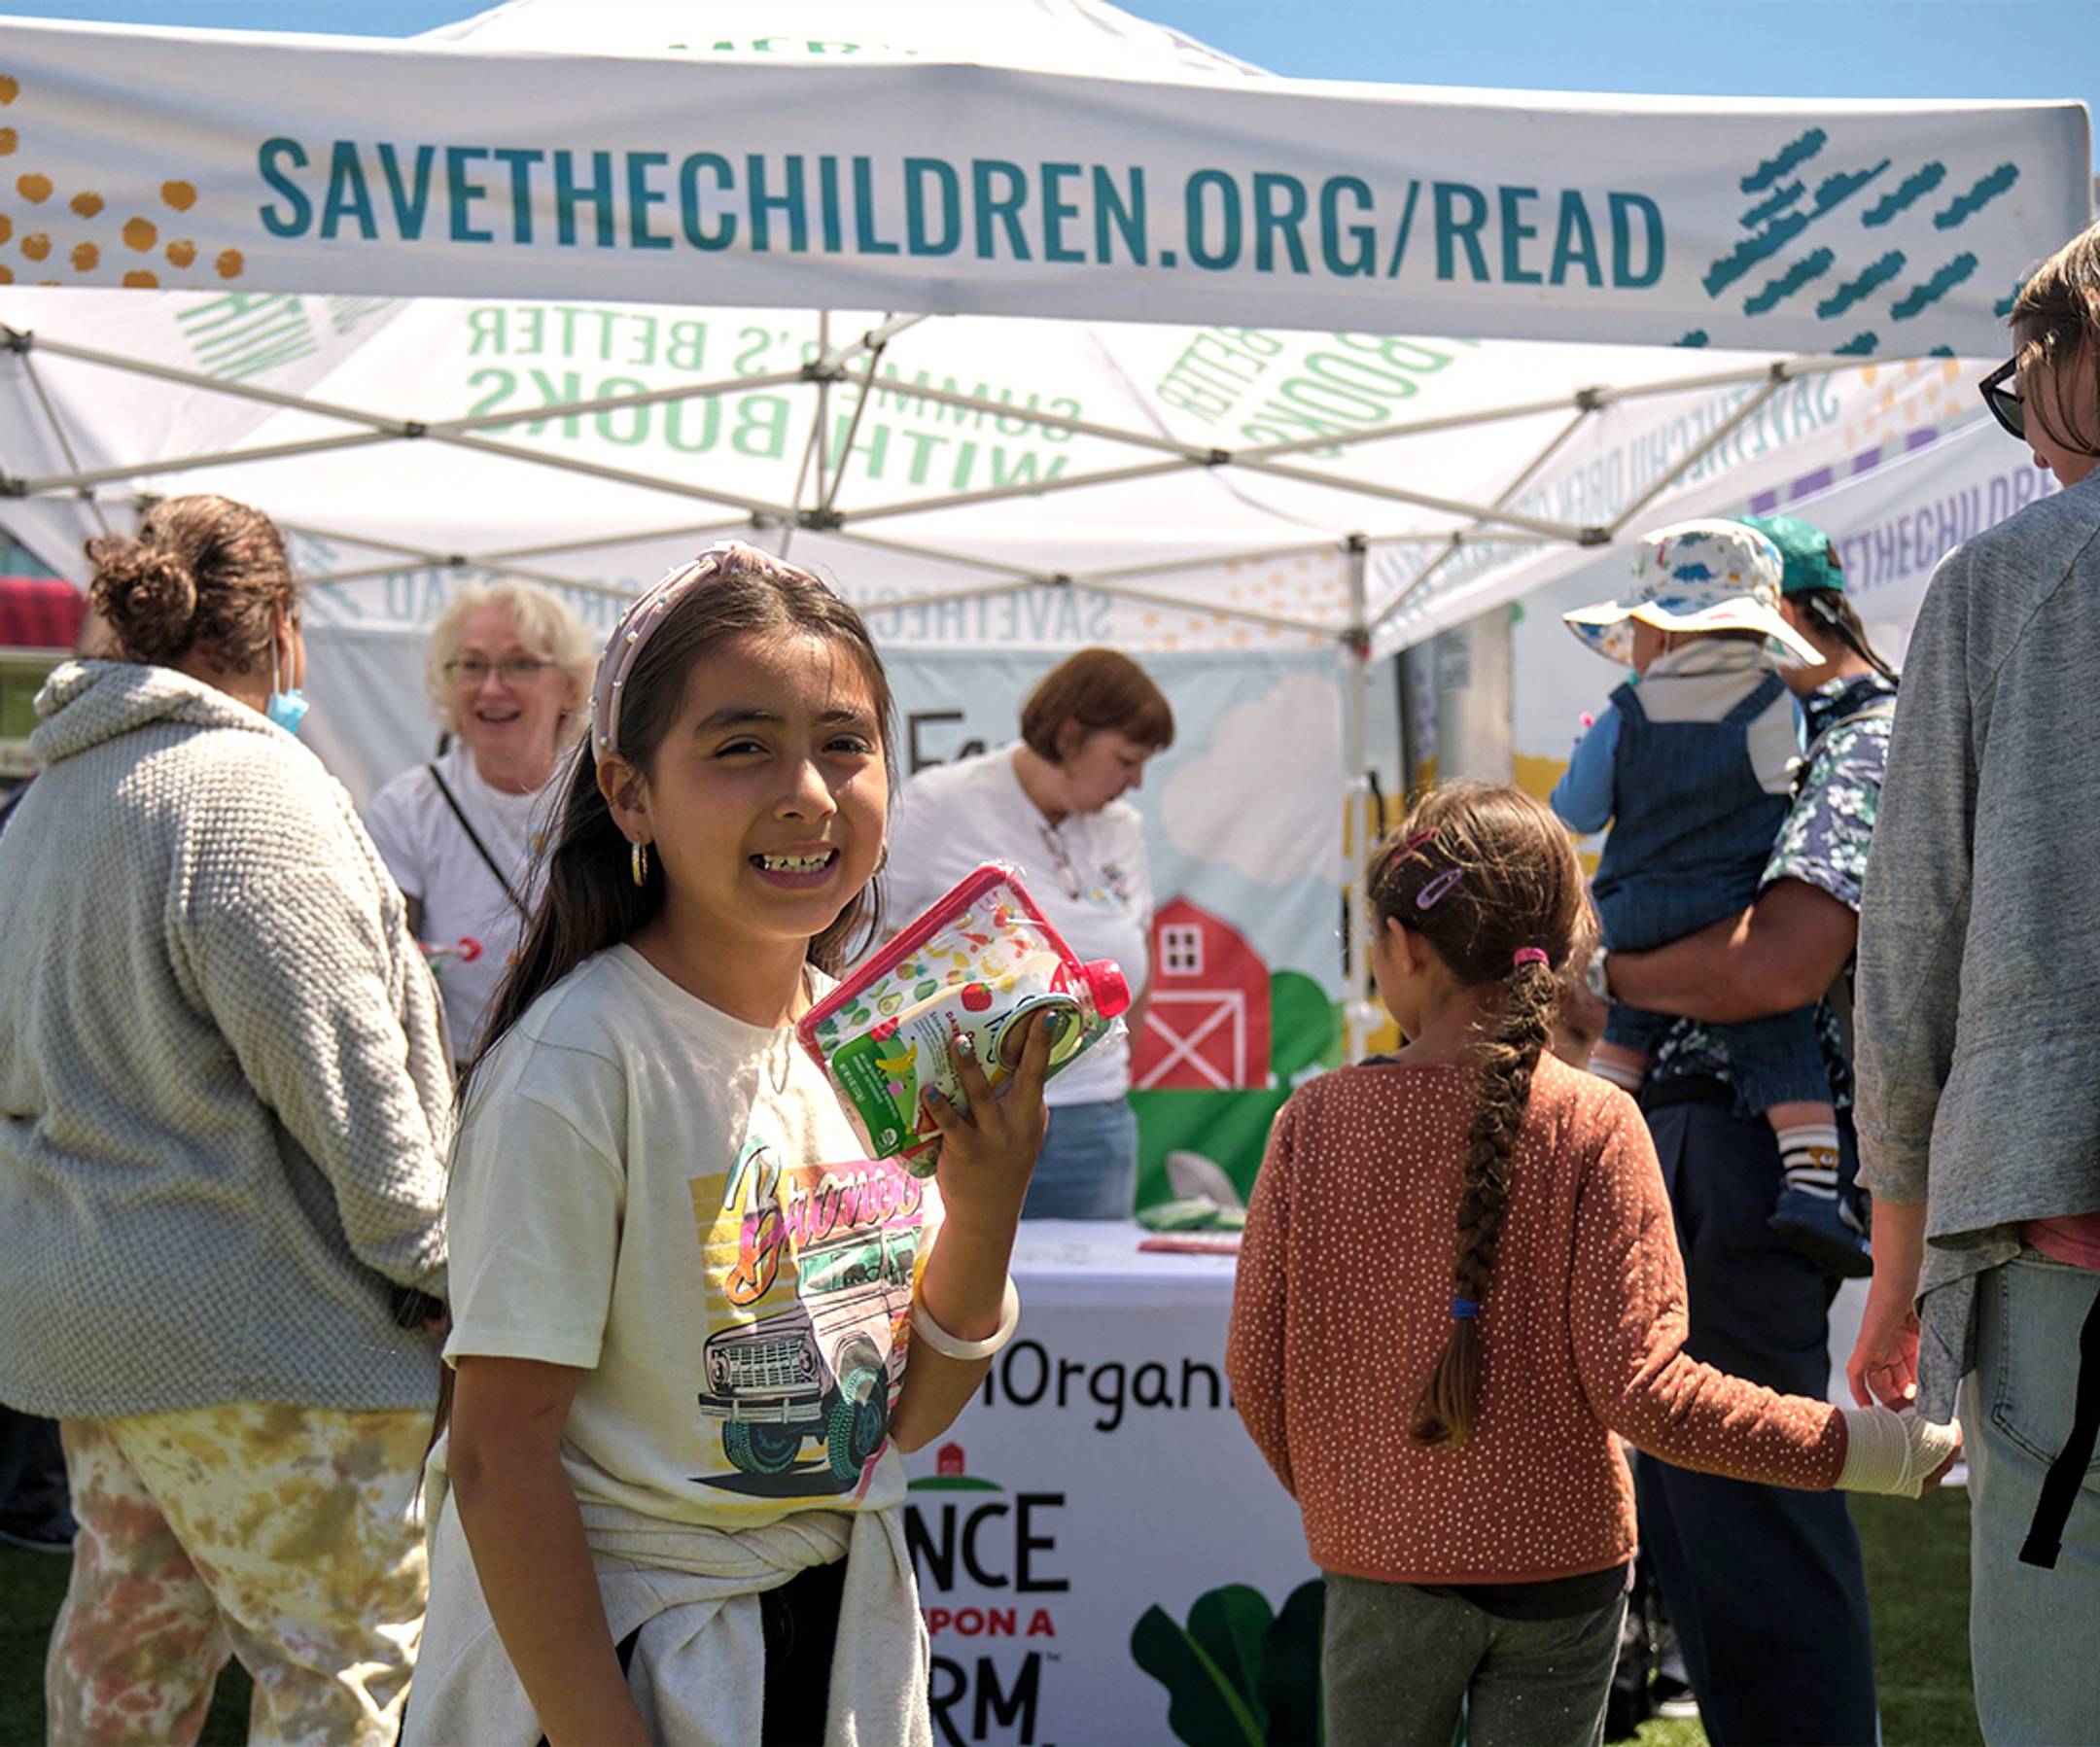 Image of a child holding a Once Upon a Farm pouch at a Save the Children event.